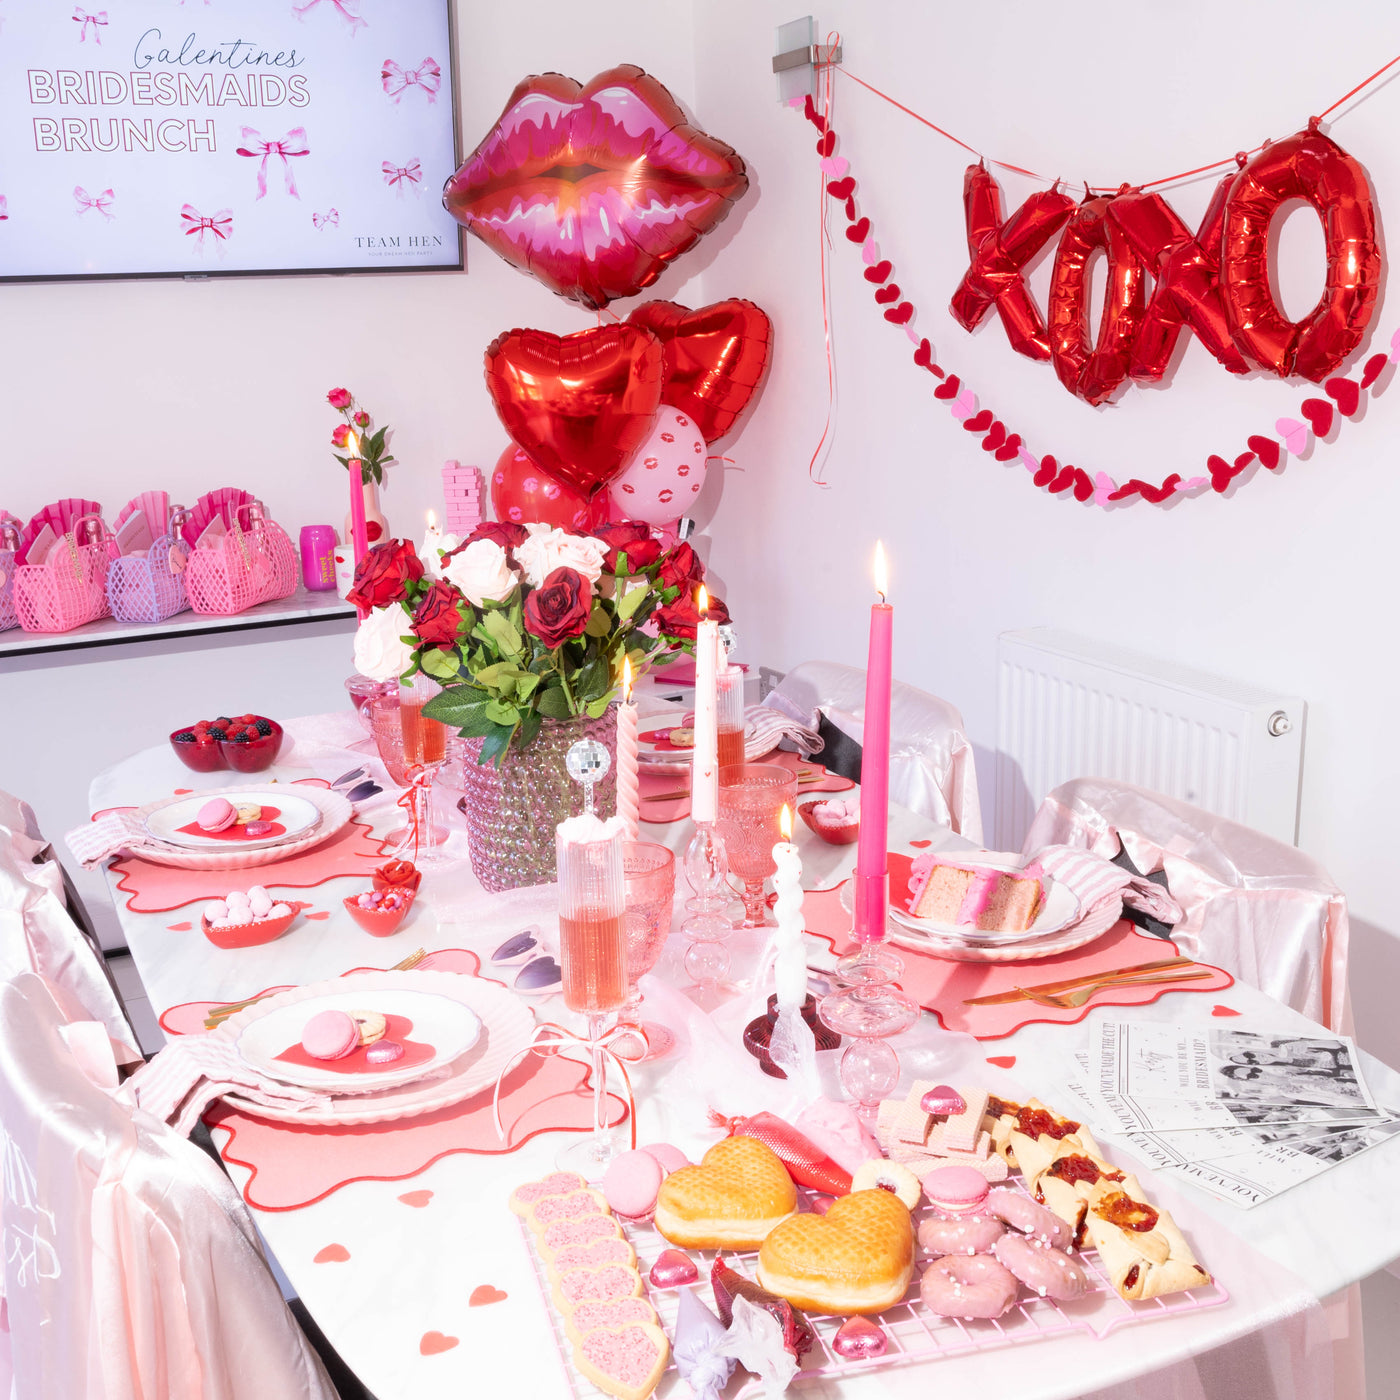 Galentine's Day Collection